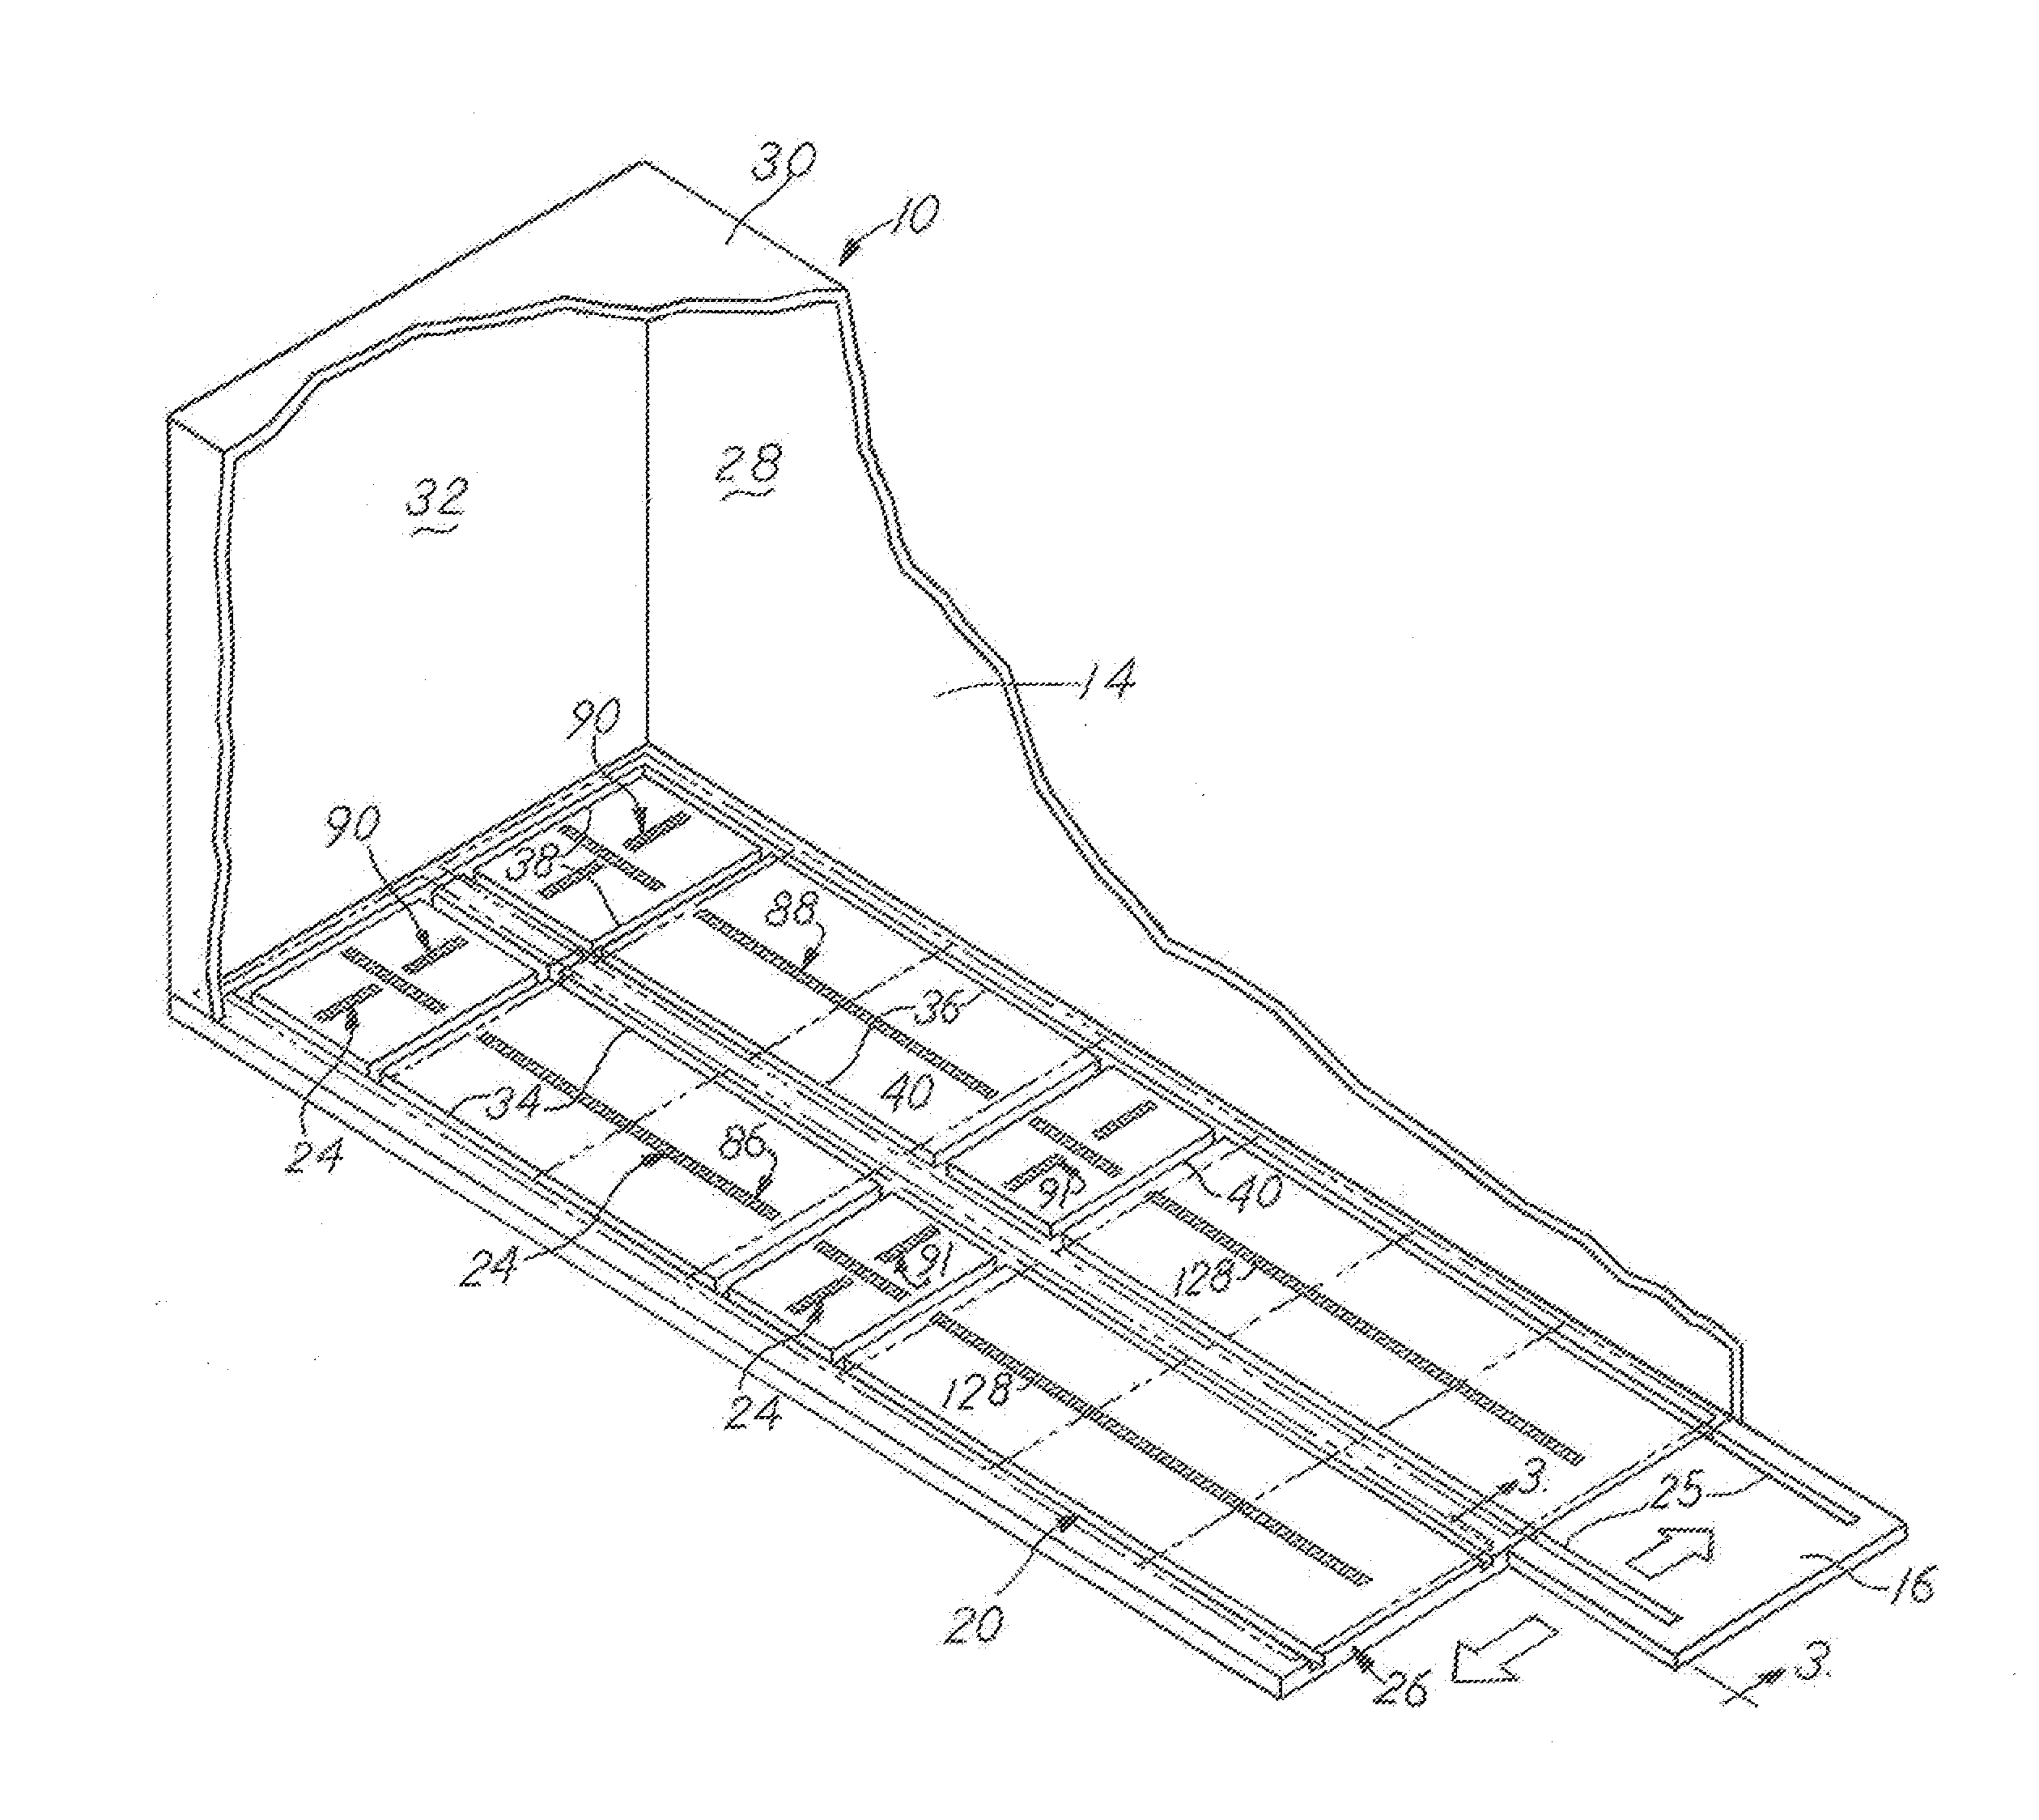 Apparatus and System for Facilitating Loading and Unloading Cargo from Cargo Spaces of Vehicles